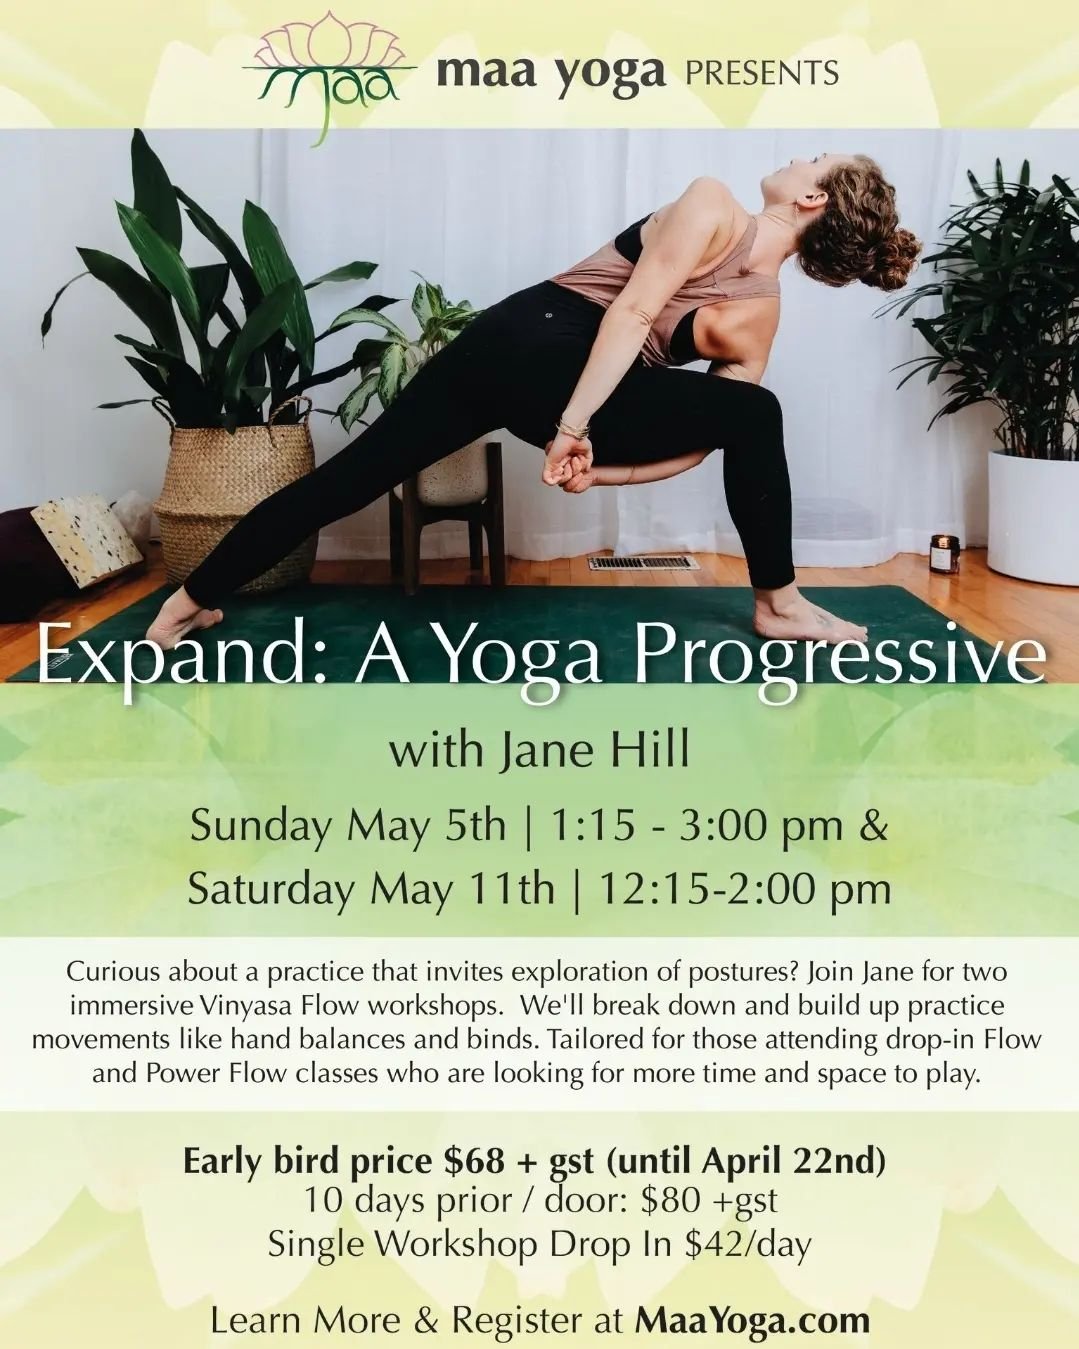 🧐Curious about a practice that invites exploration of postures? Join Jane for 2 immersive vinyasa flow workshops.

We'll break down and build up practice movements like hand balances and binds. Tailored for those attending drop-in Flow and Power F